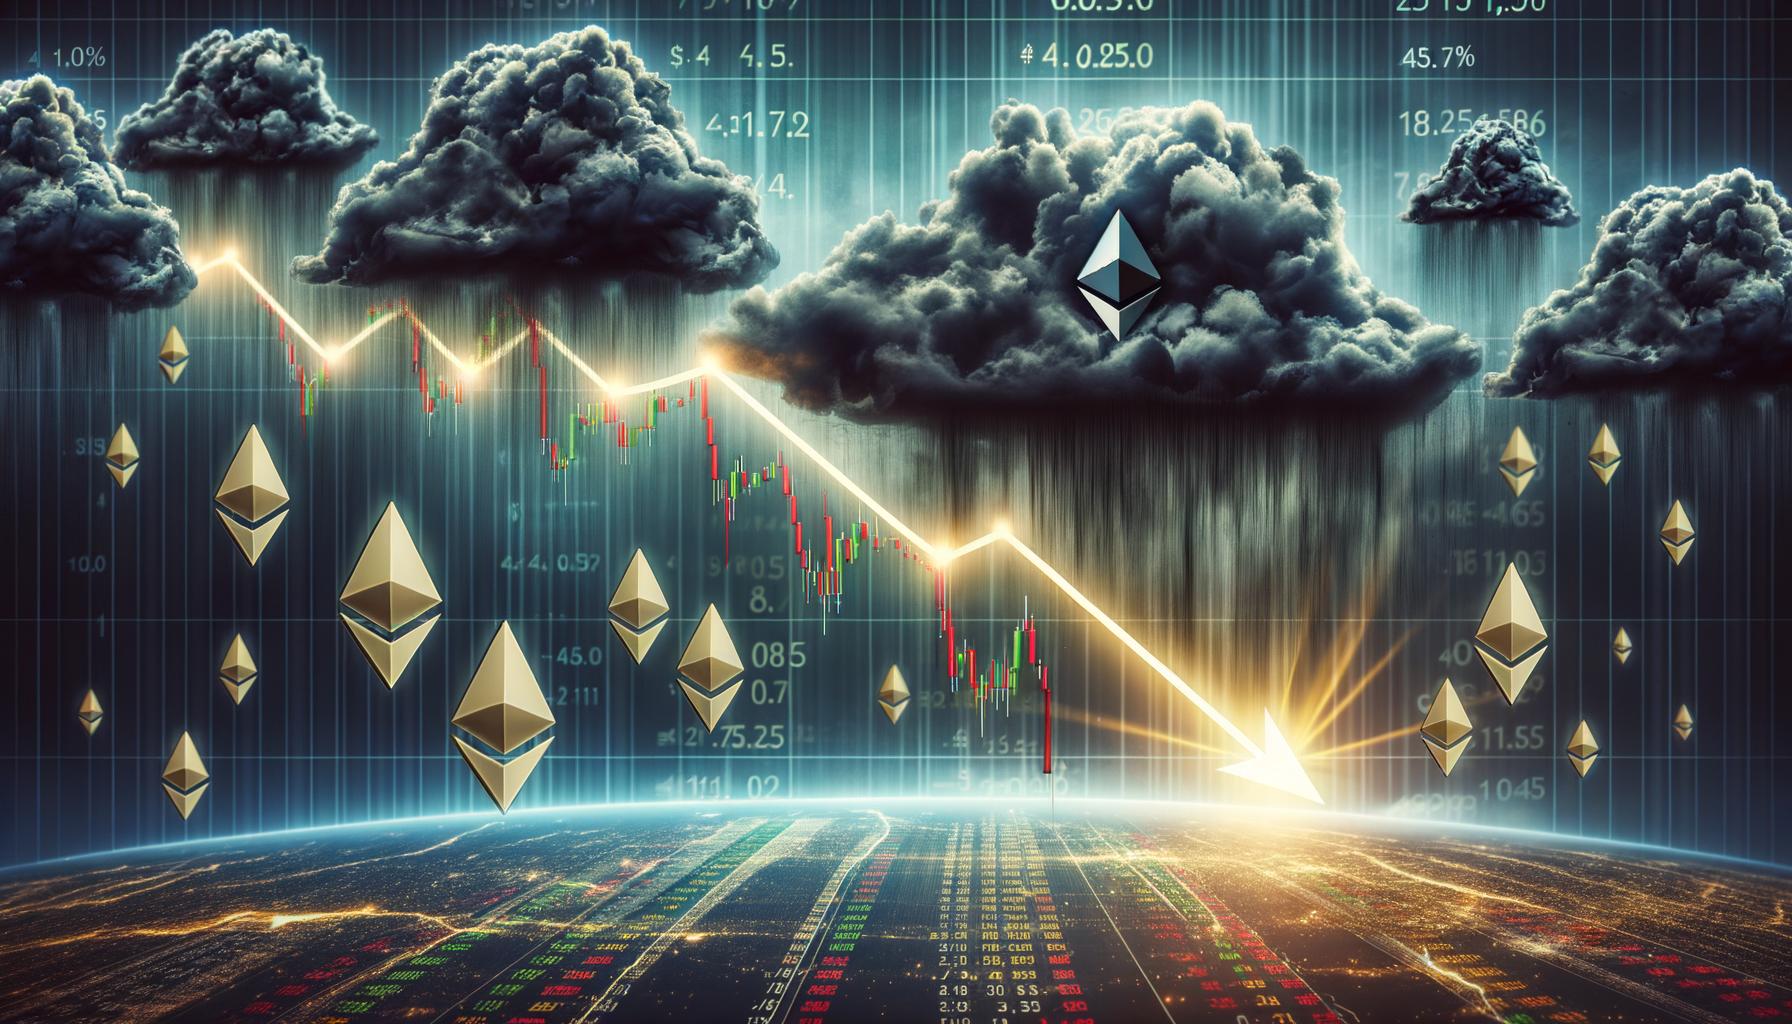 Ethereum Price Plummets: Potential Recovery Hindered by Bearish Pressure